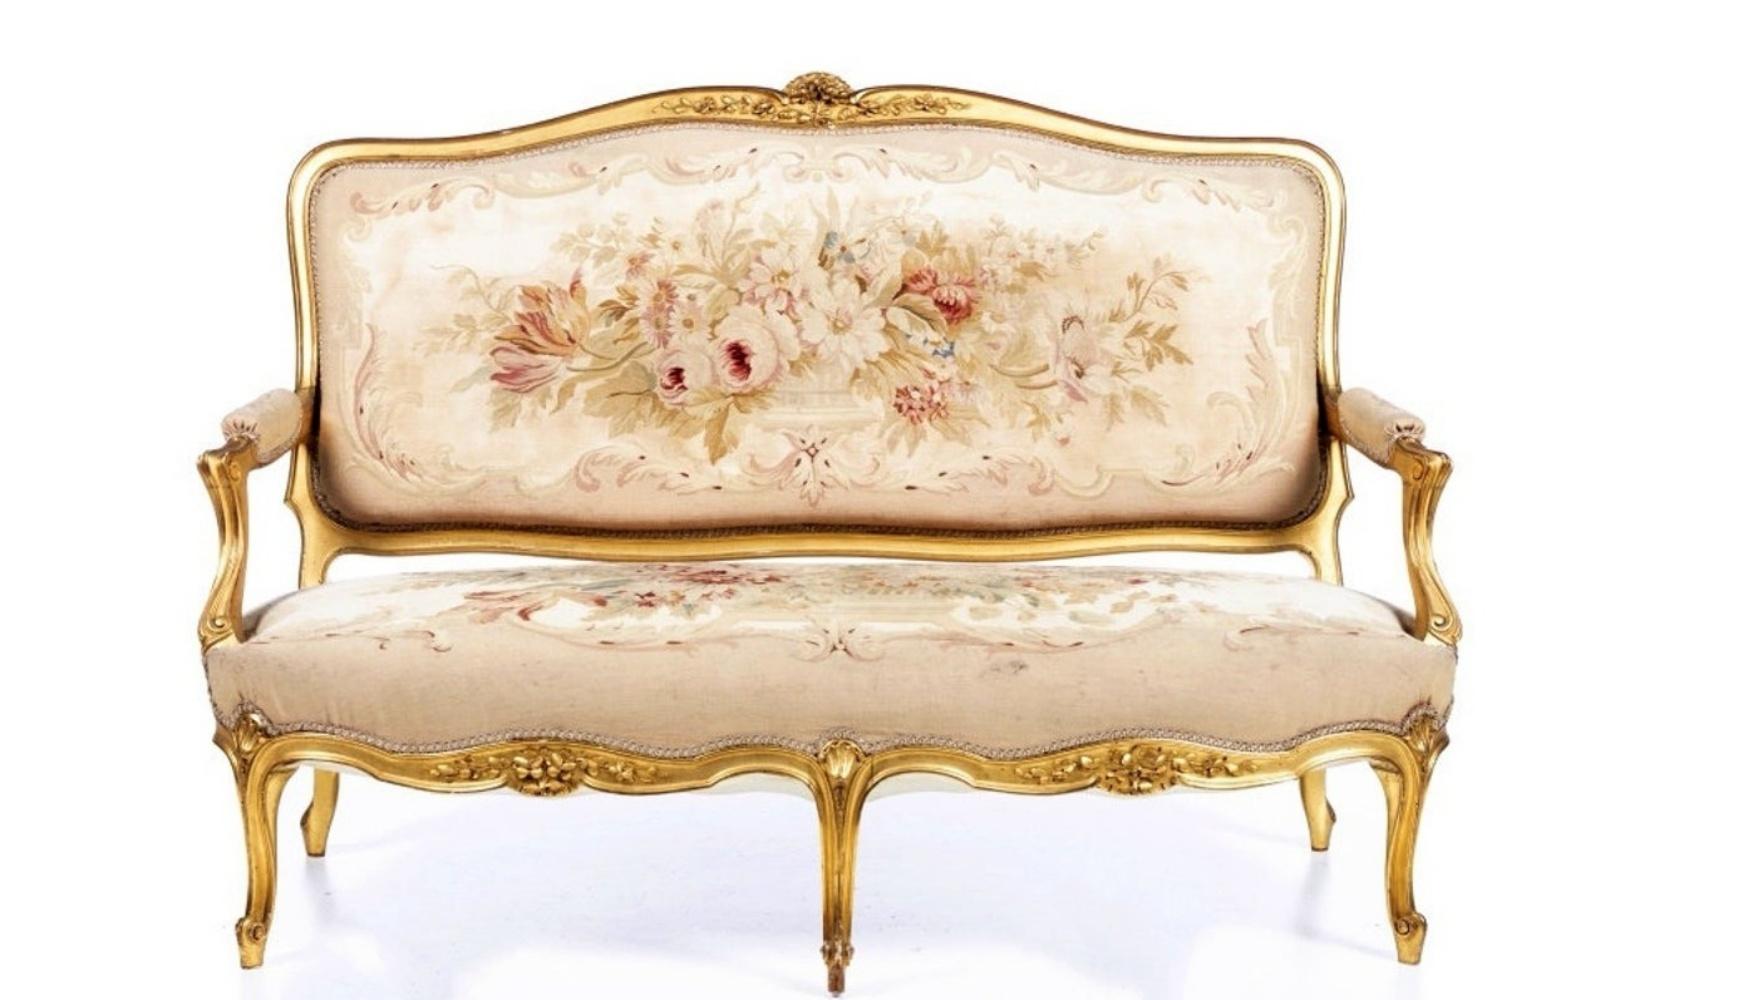 Title: Four Louis XV Armchairs and Sofa
Date/Period: XIX Century
Dimension: (Sofa) 105 x 168 x 78 cm.
Material: Carved and gilded wood
Additional Information: Four Louis XV Armchairs and Sofa. French, XIXth Century. In carved and gilded wood,